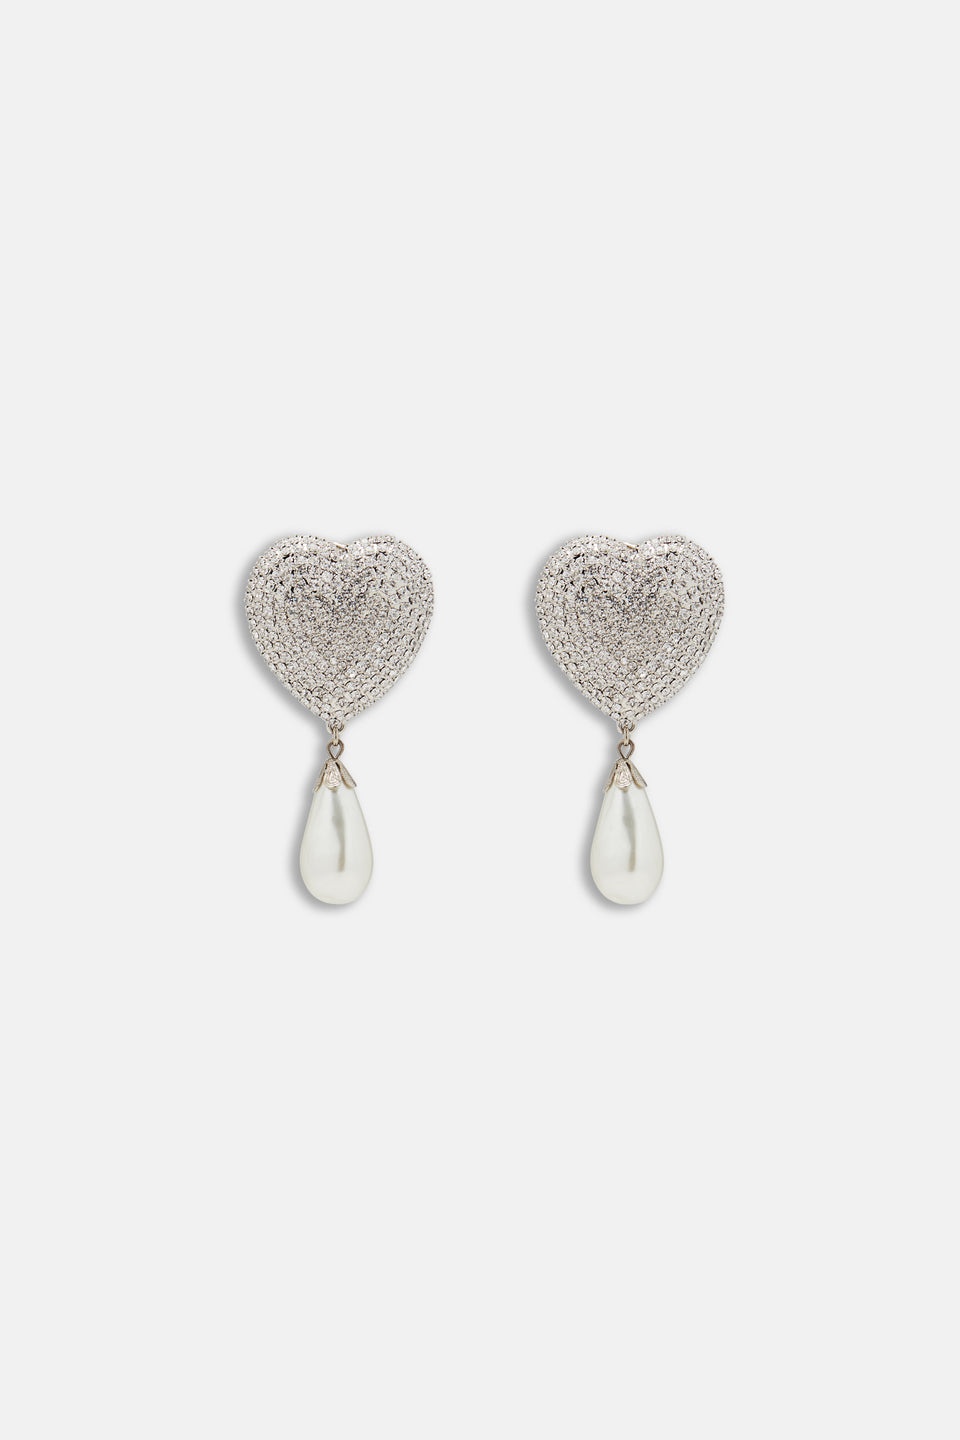 HEART CRYSTAL EARRINGS WITH PENDANT PEARL - 1